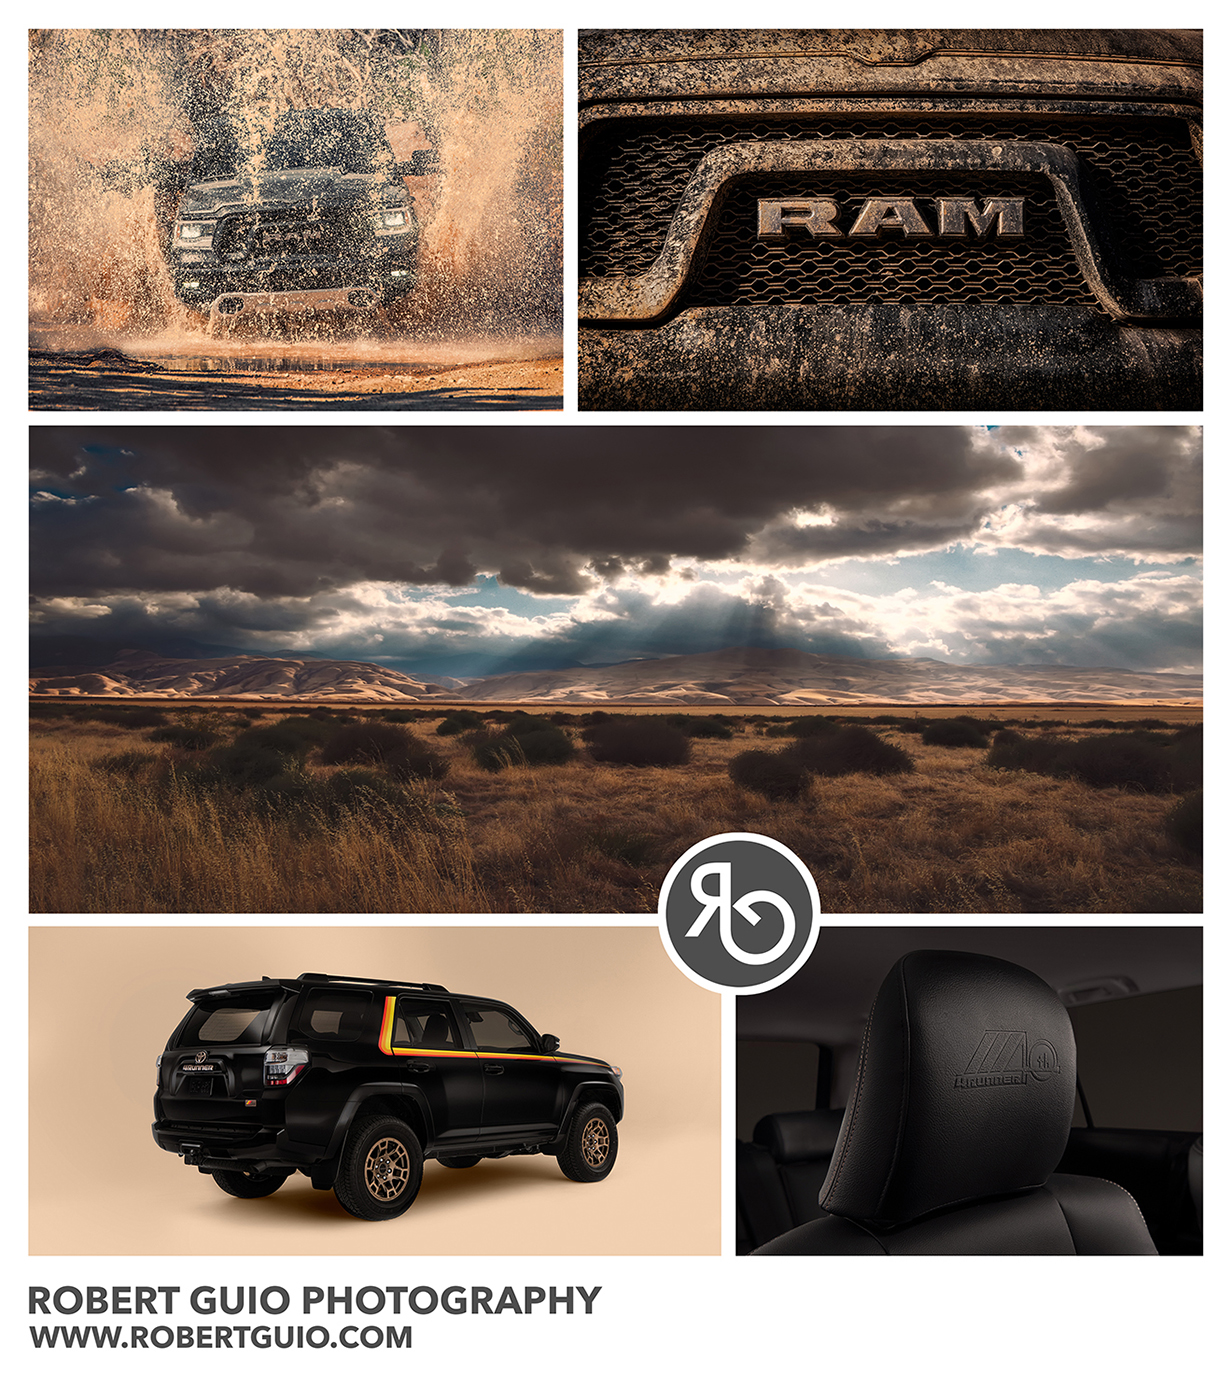 Automotive photography by Robert Guio, depicting cars in motion, car details, and landscapes. We used this digital promo as part of Robert's email campaign during the Client Introductions process.